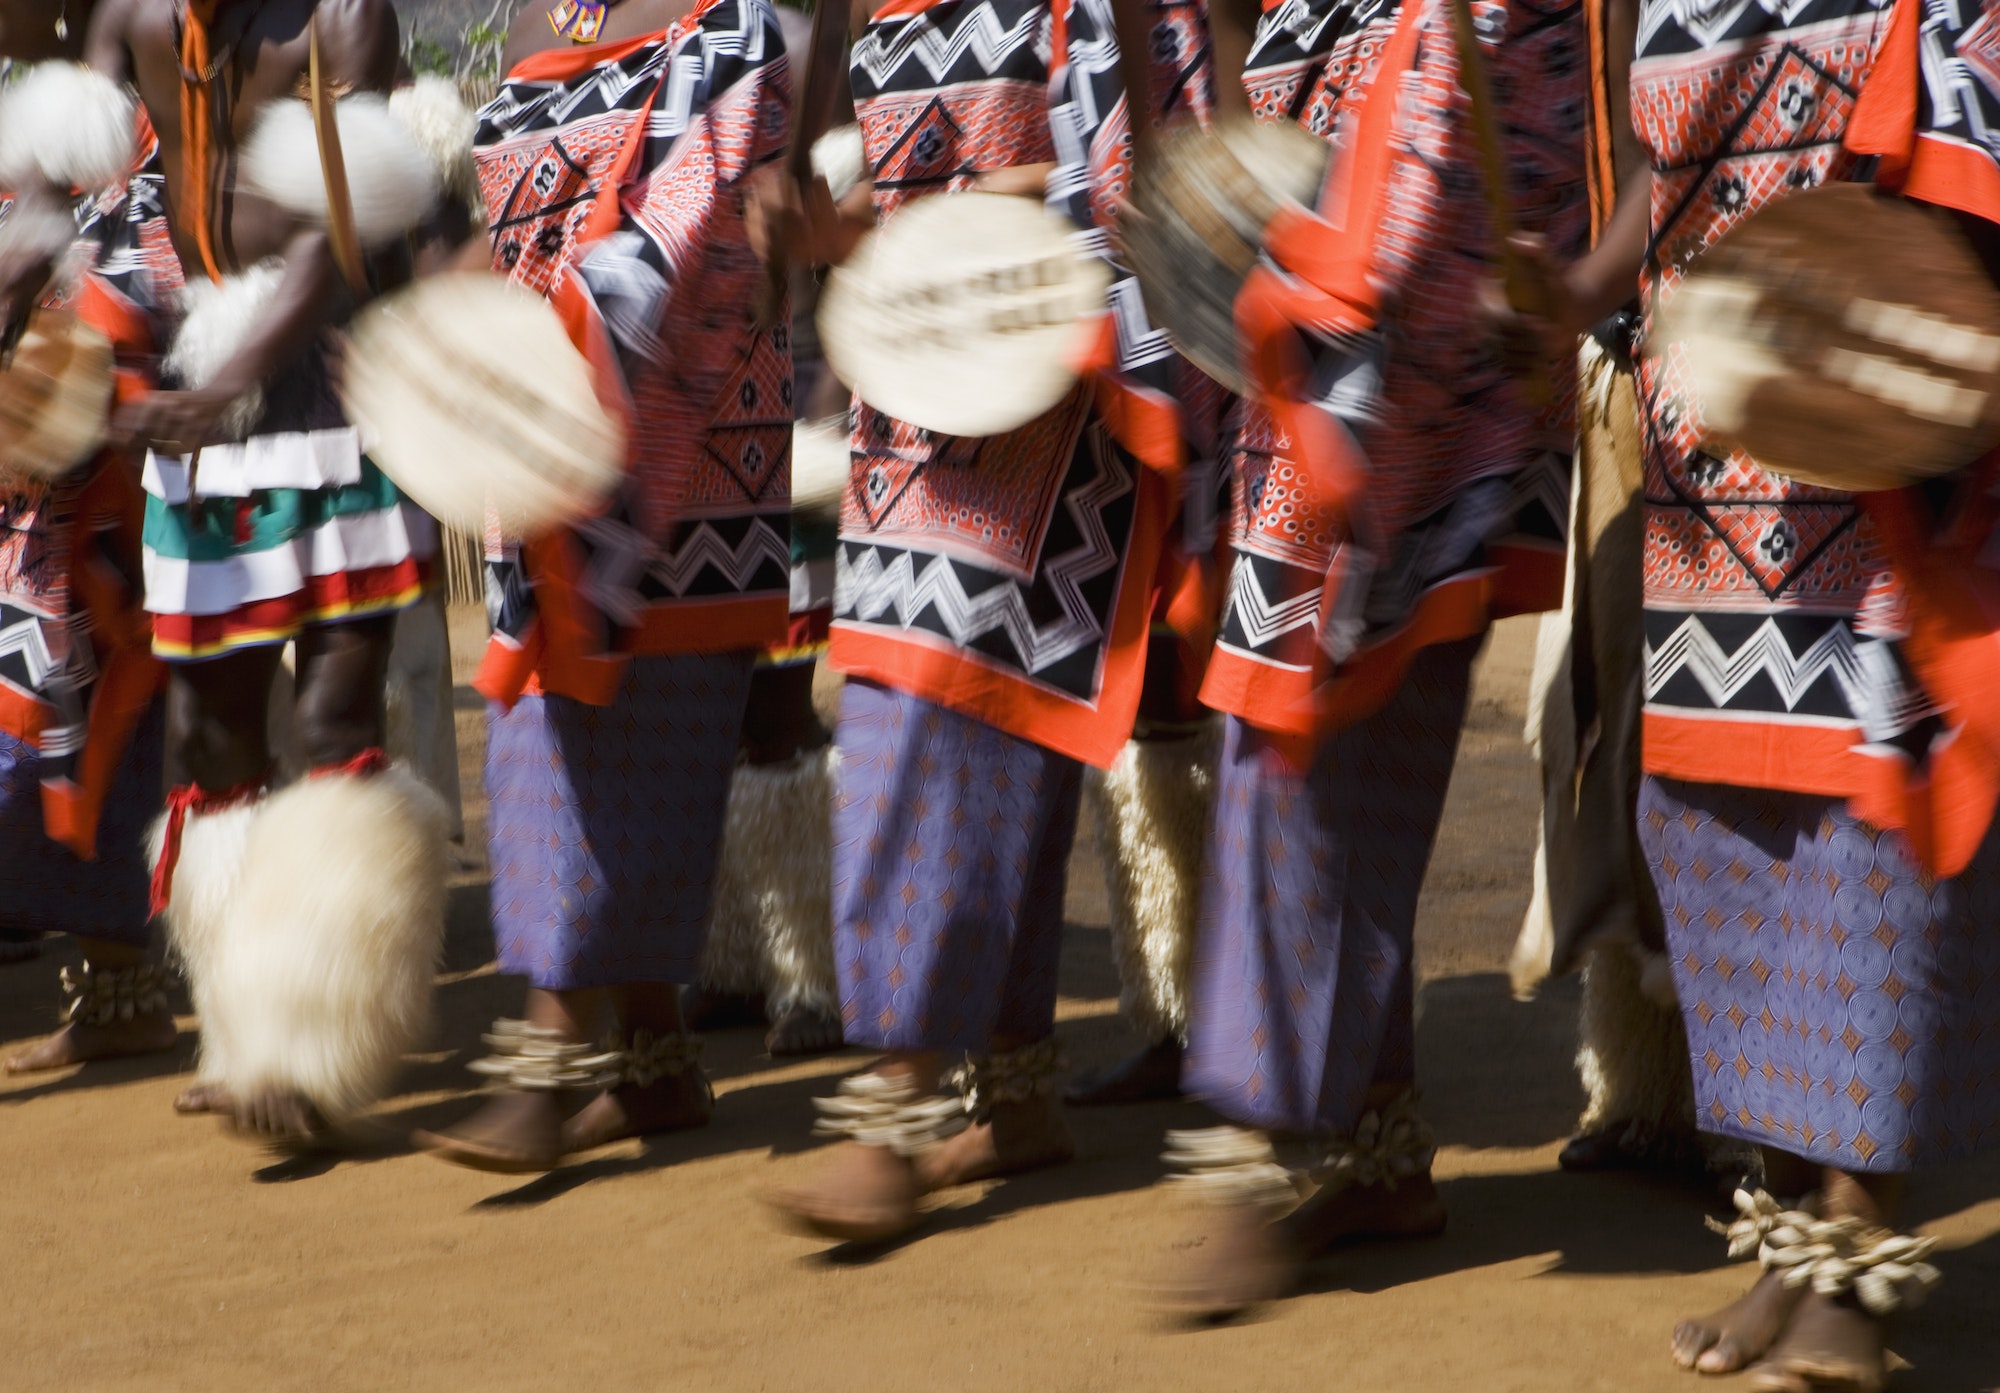 Dancers wearing traditional dress, Kingdom of Eswatini, Southern Africa.